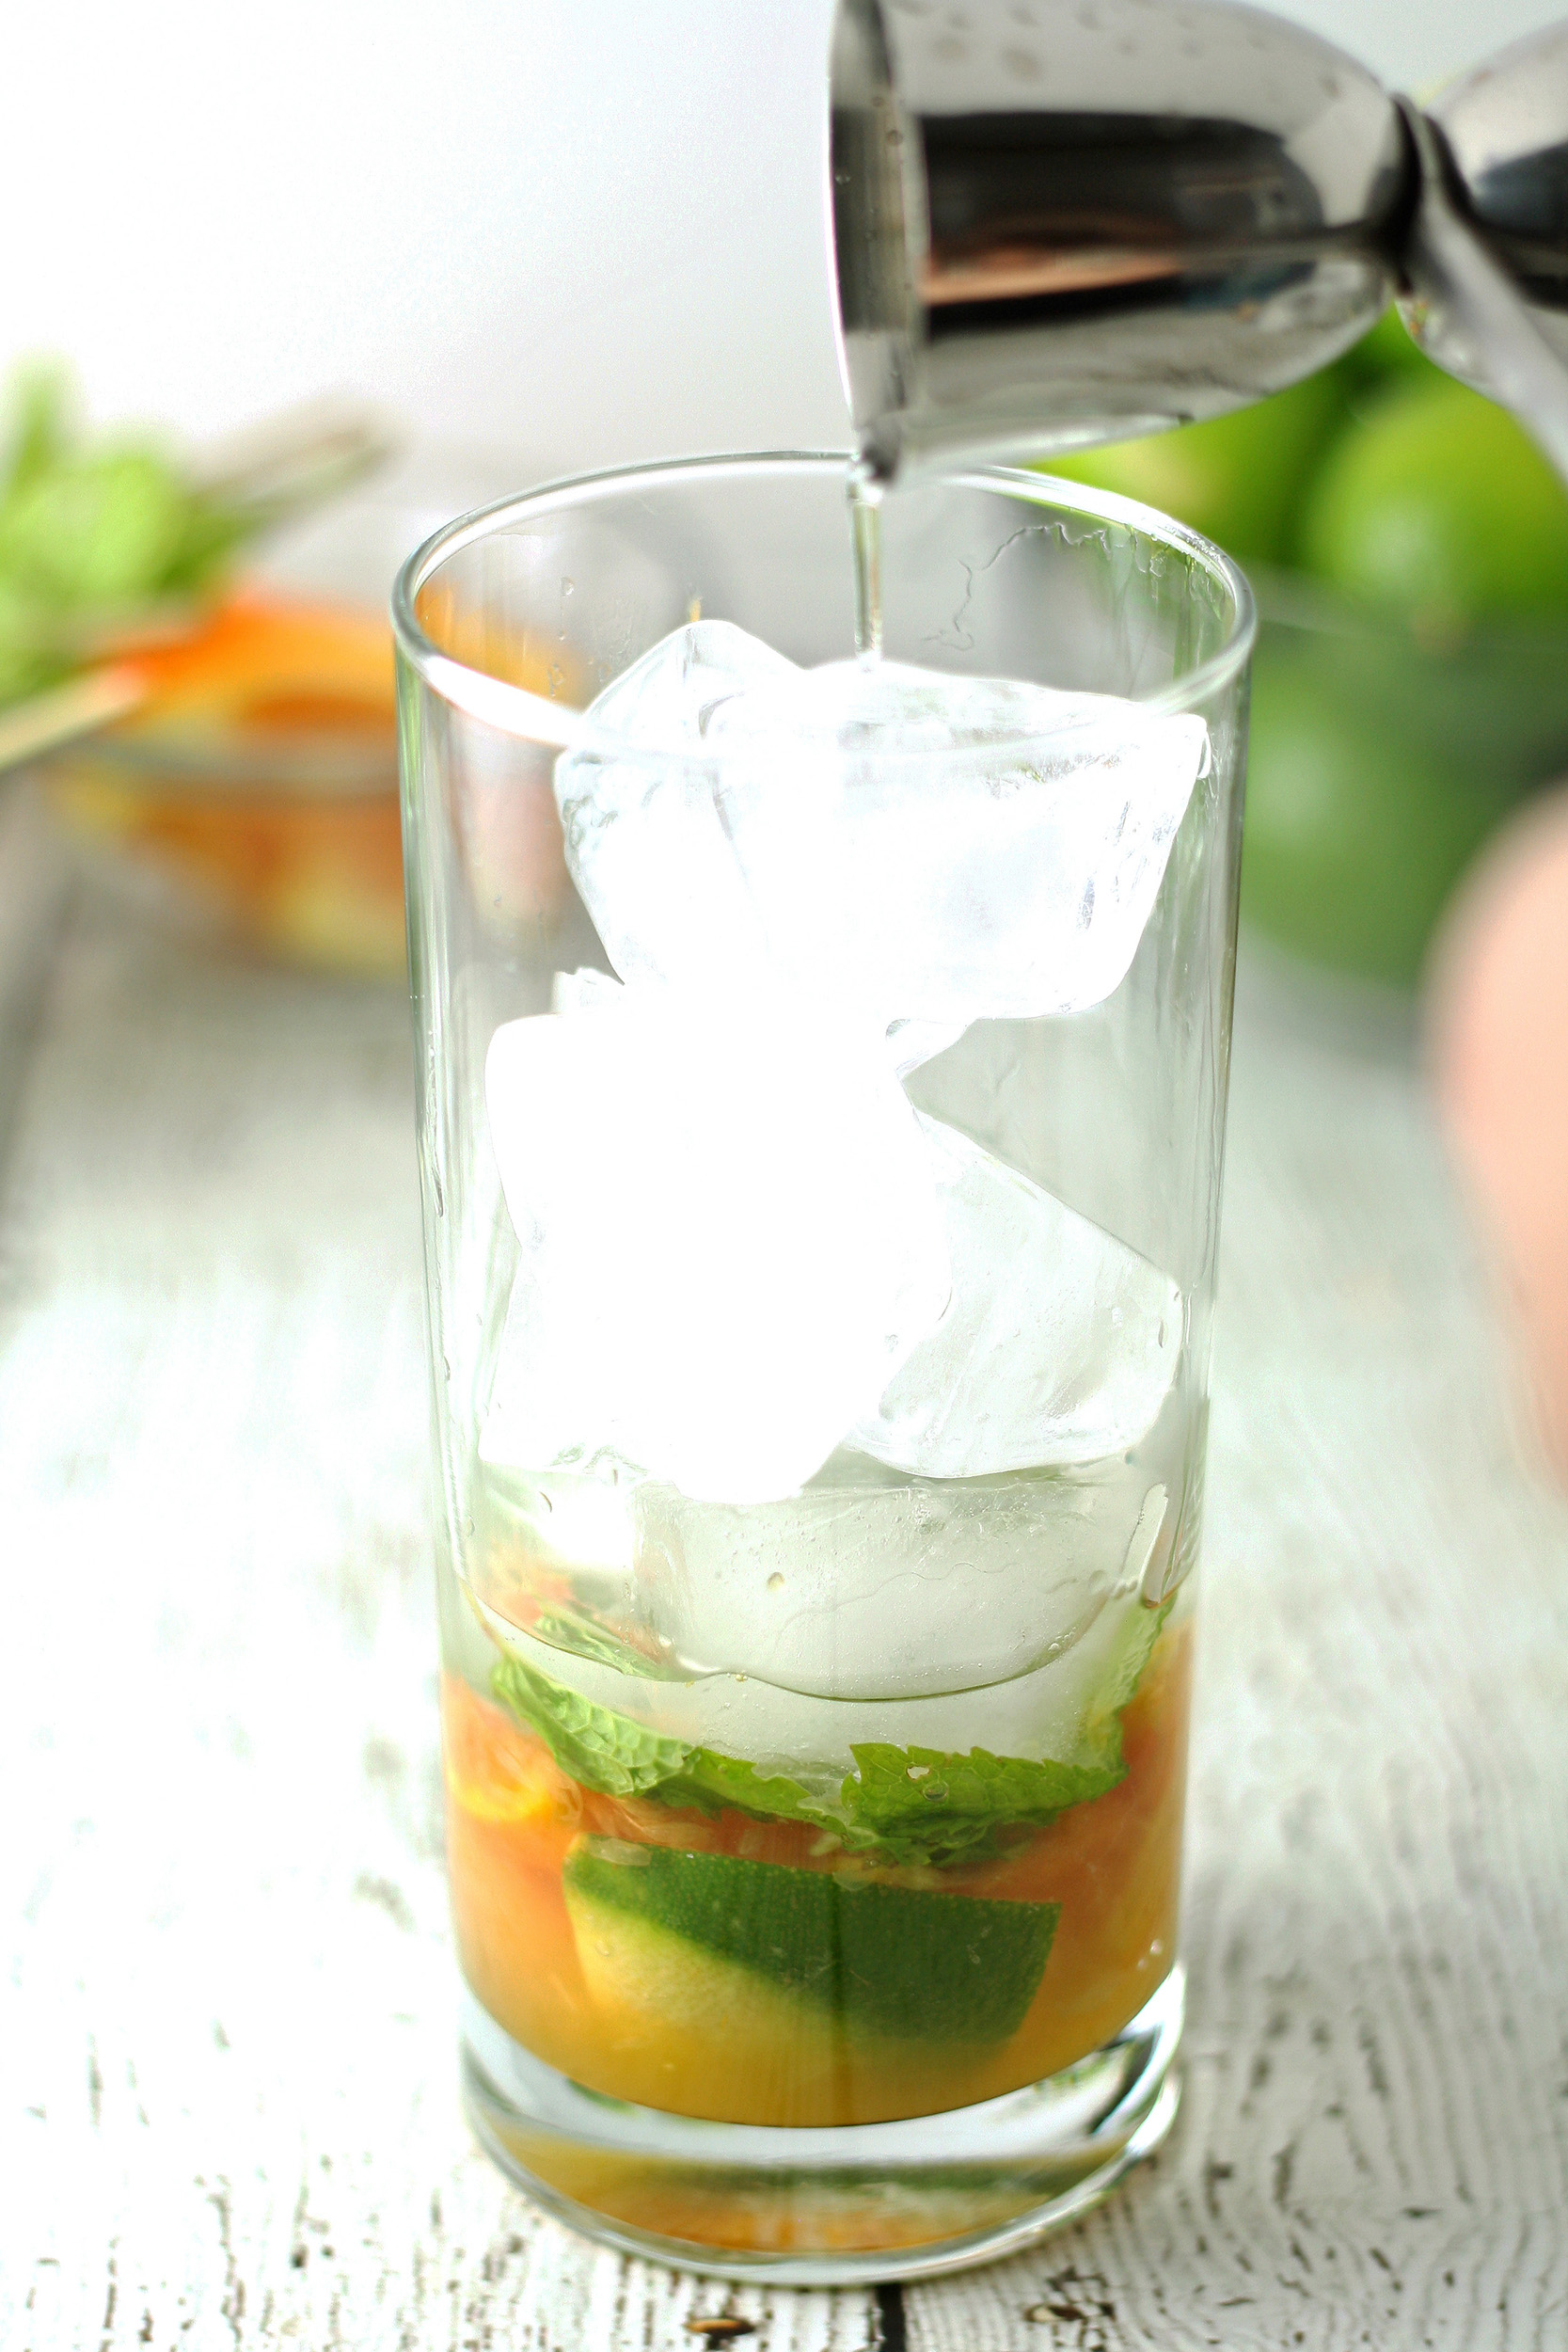 adding rum to a glass with muddle mint, citrus, and ice cubes